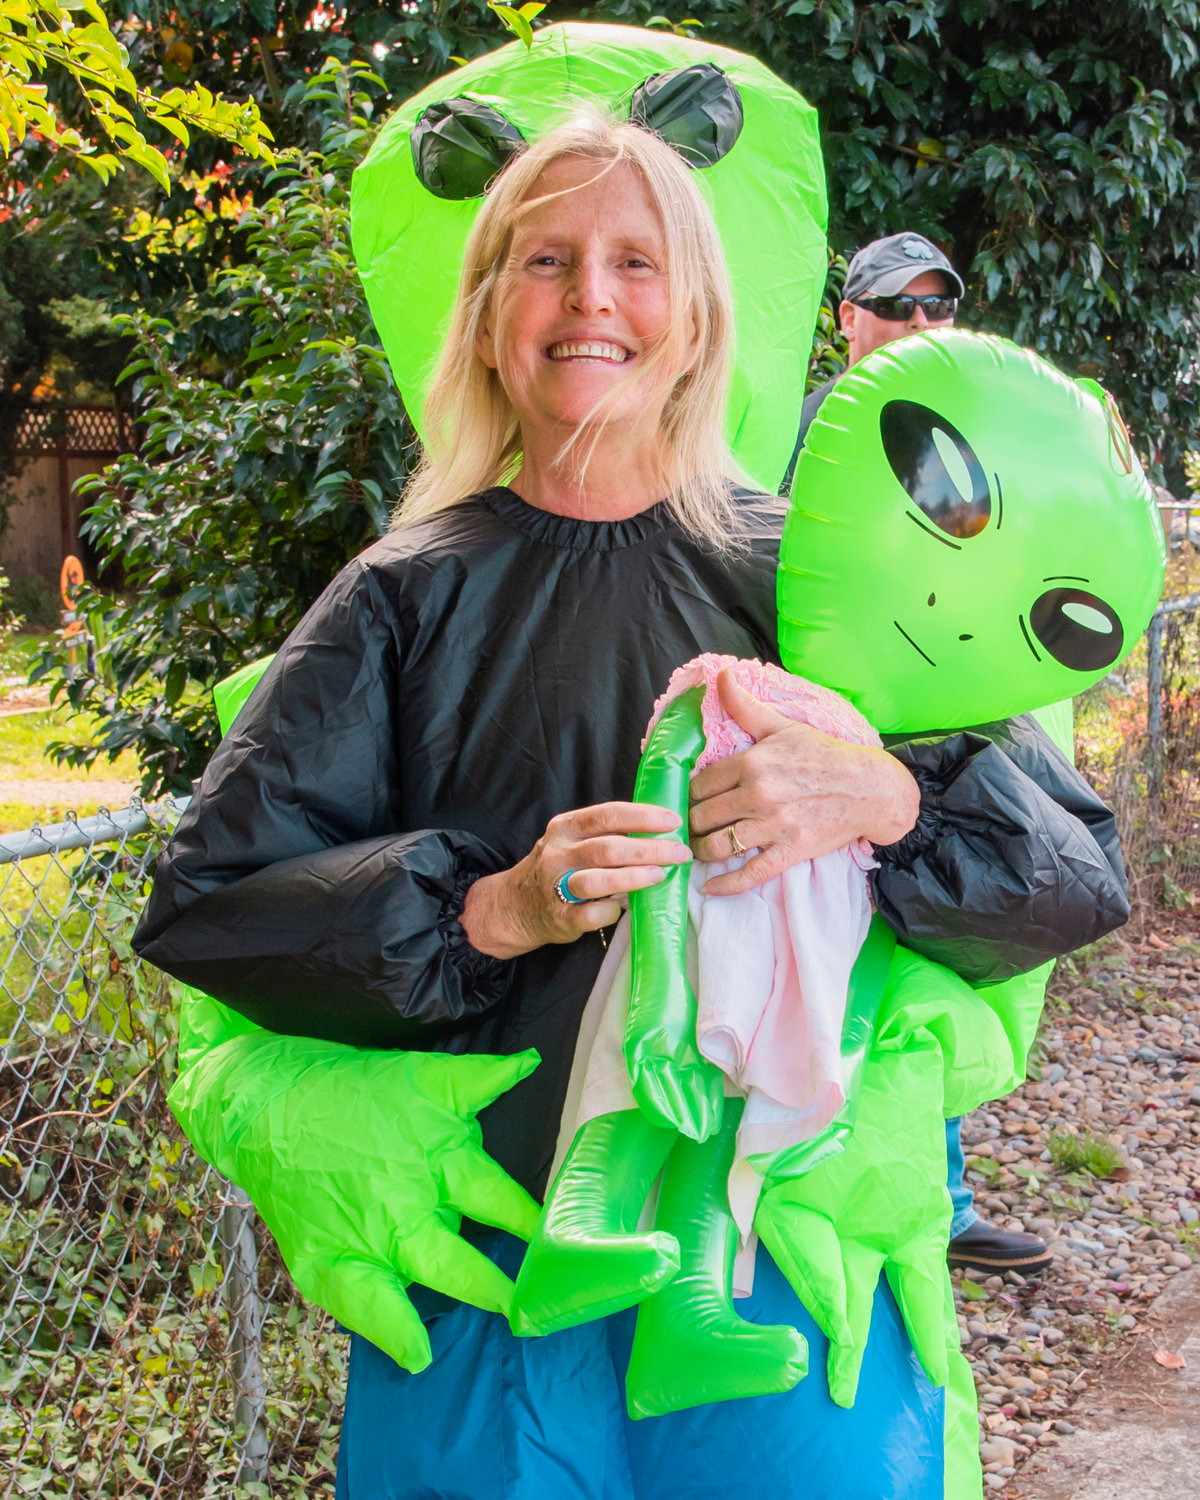 Linda Rozier smiles and poses for a photo while attending the Onalaska Apple Harvest parade holding an alien and dressed as an abductee Saturday morning.